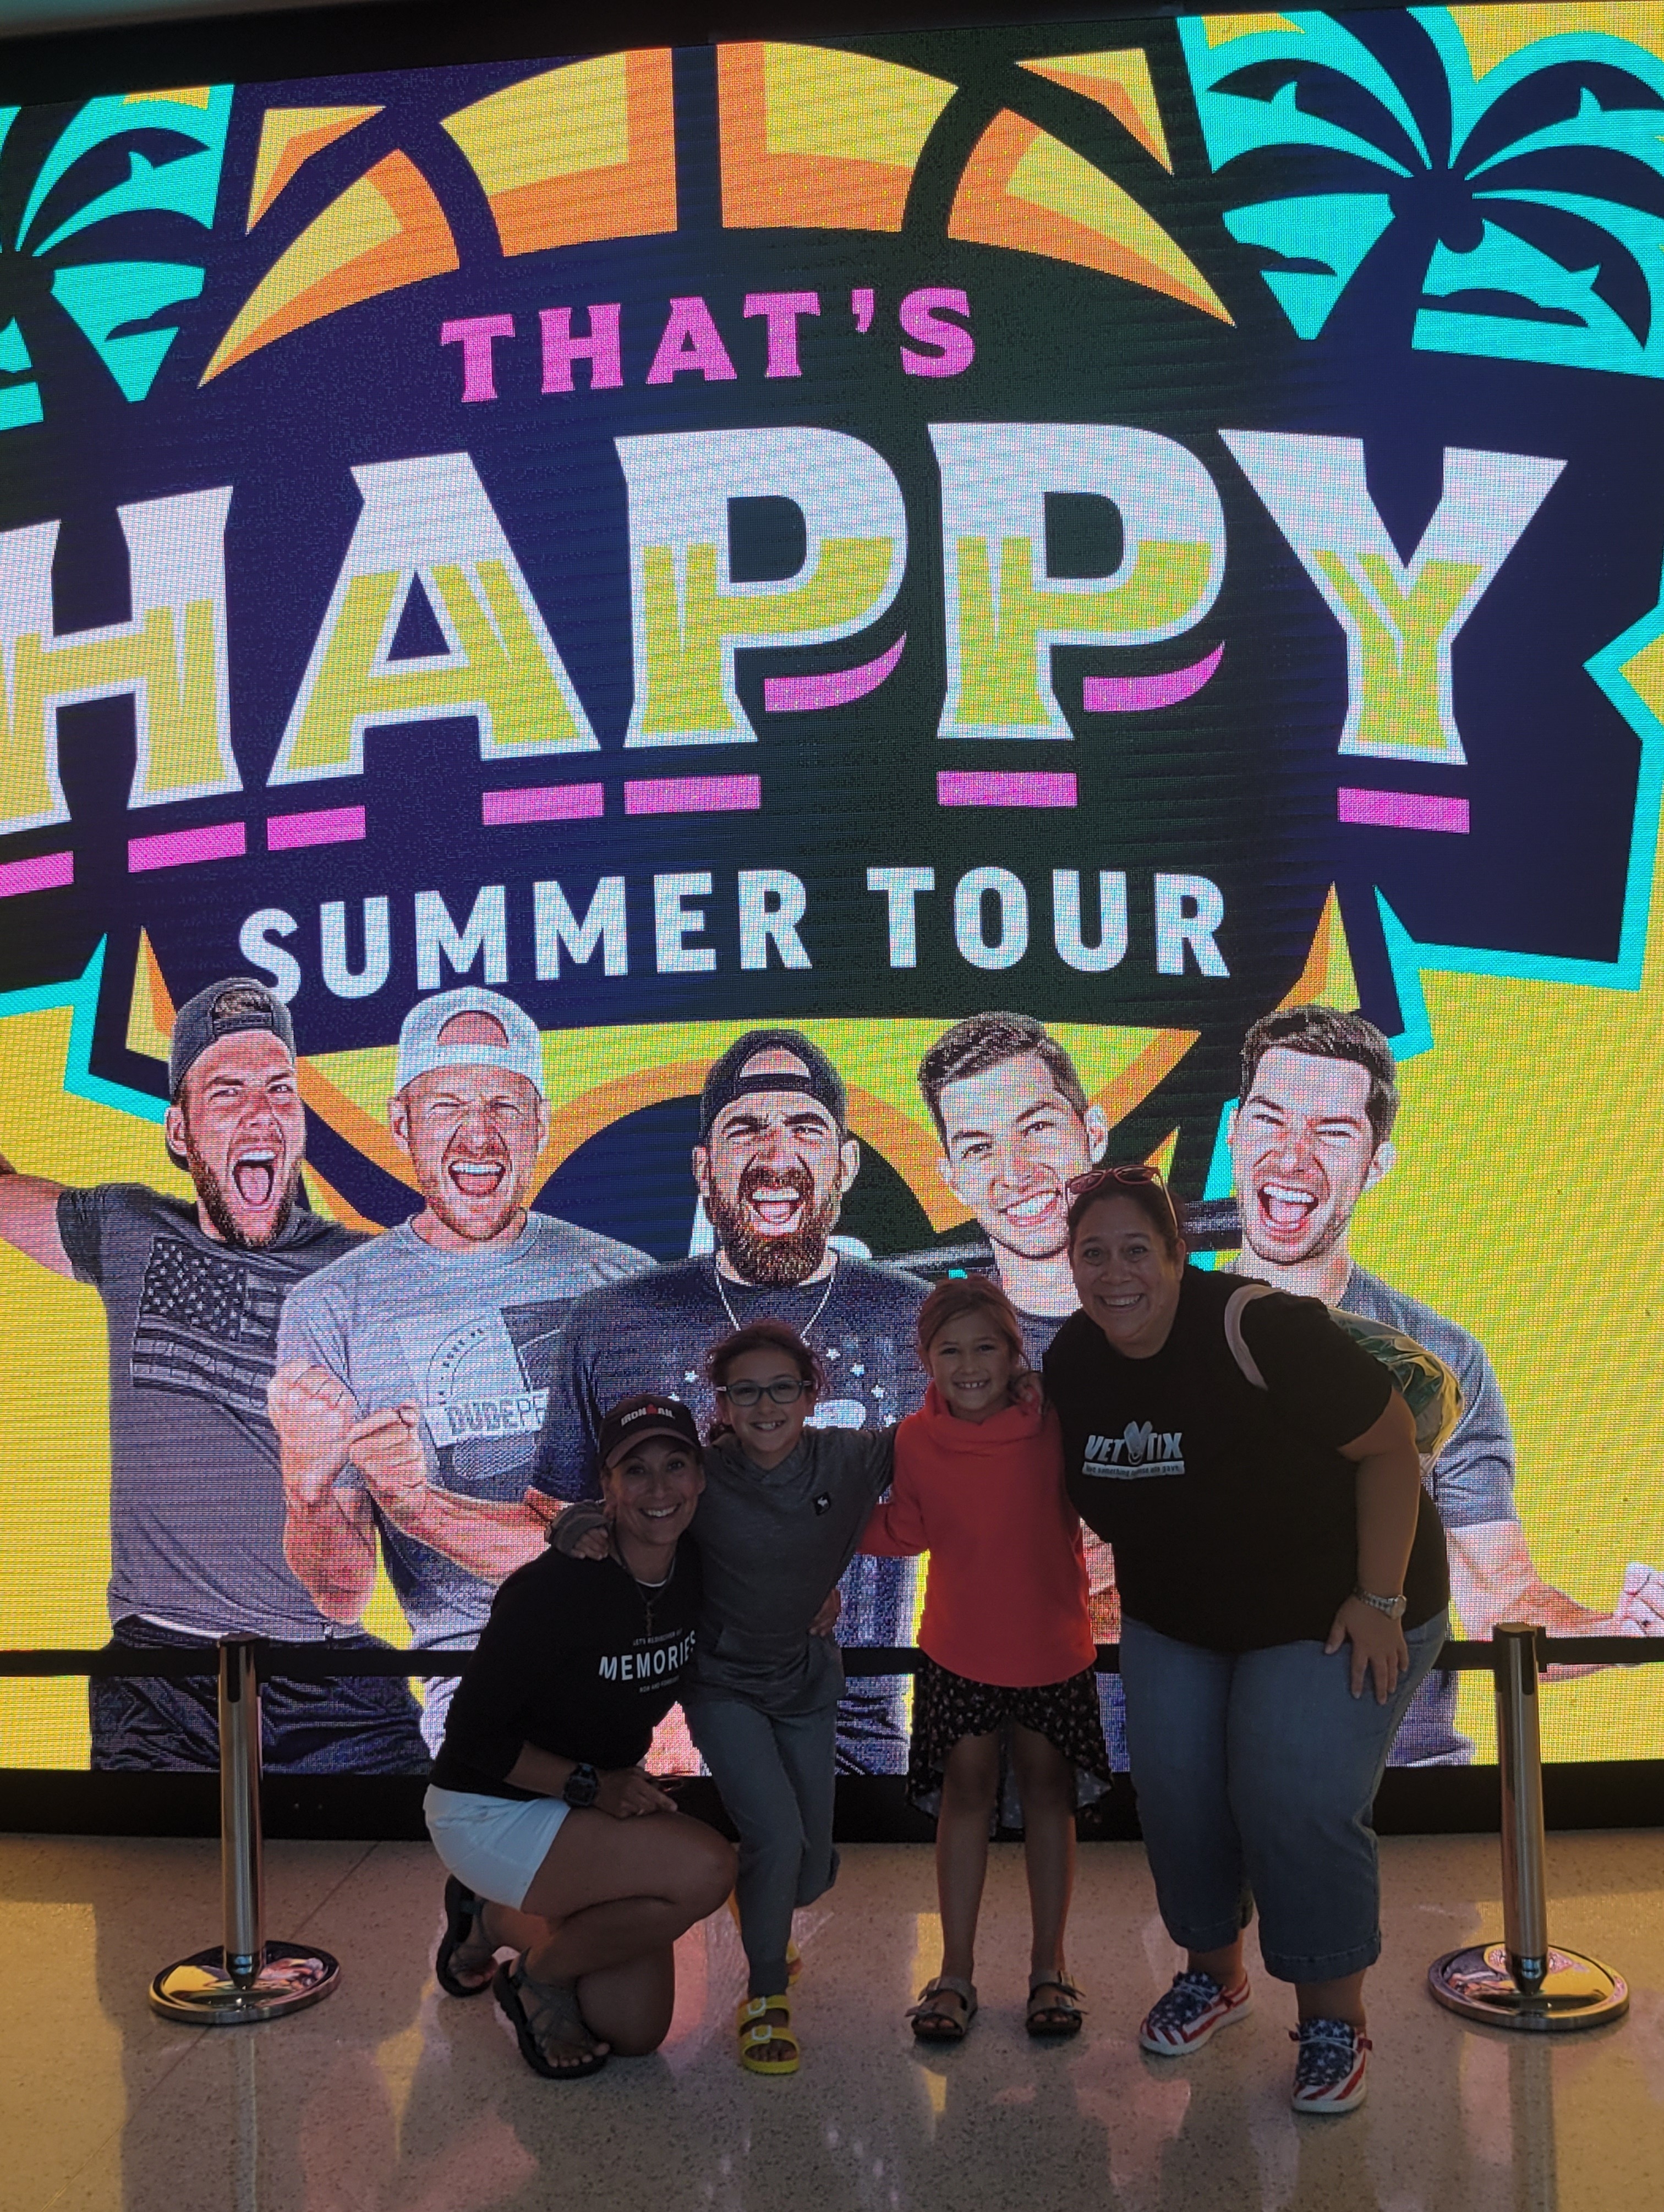 Dude Perfect: That's Happy Tour 2022